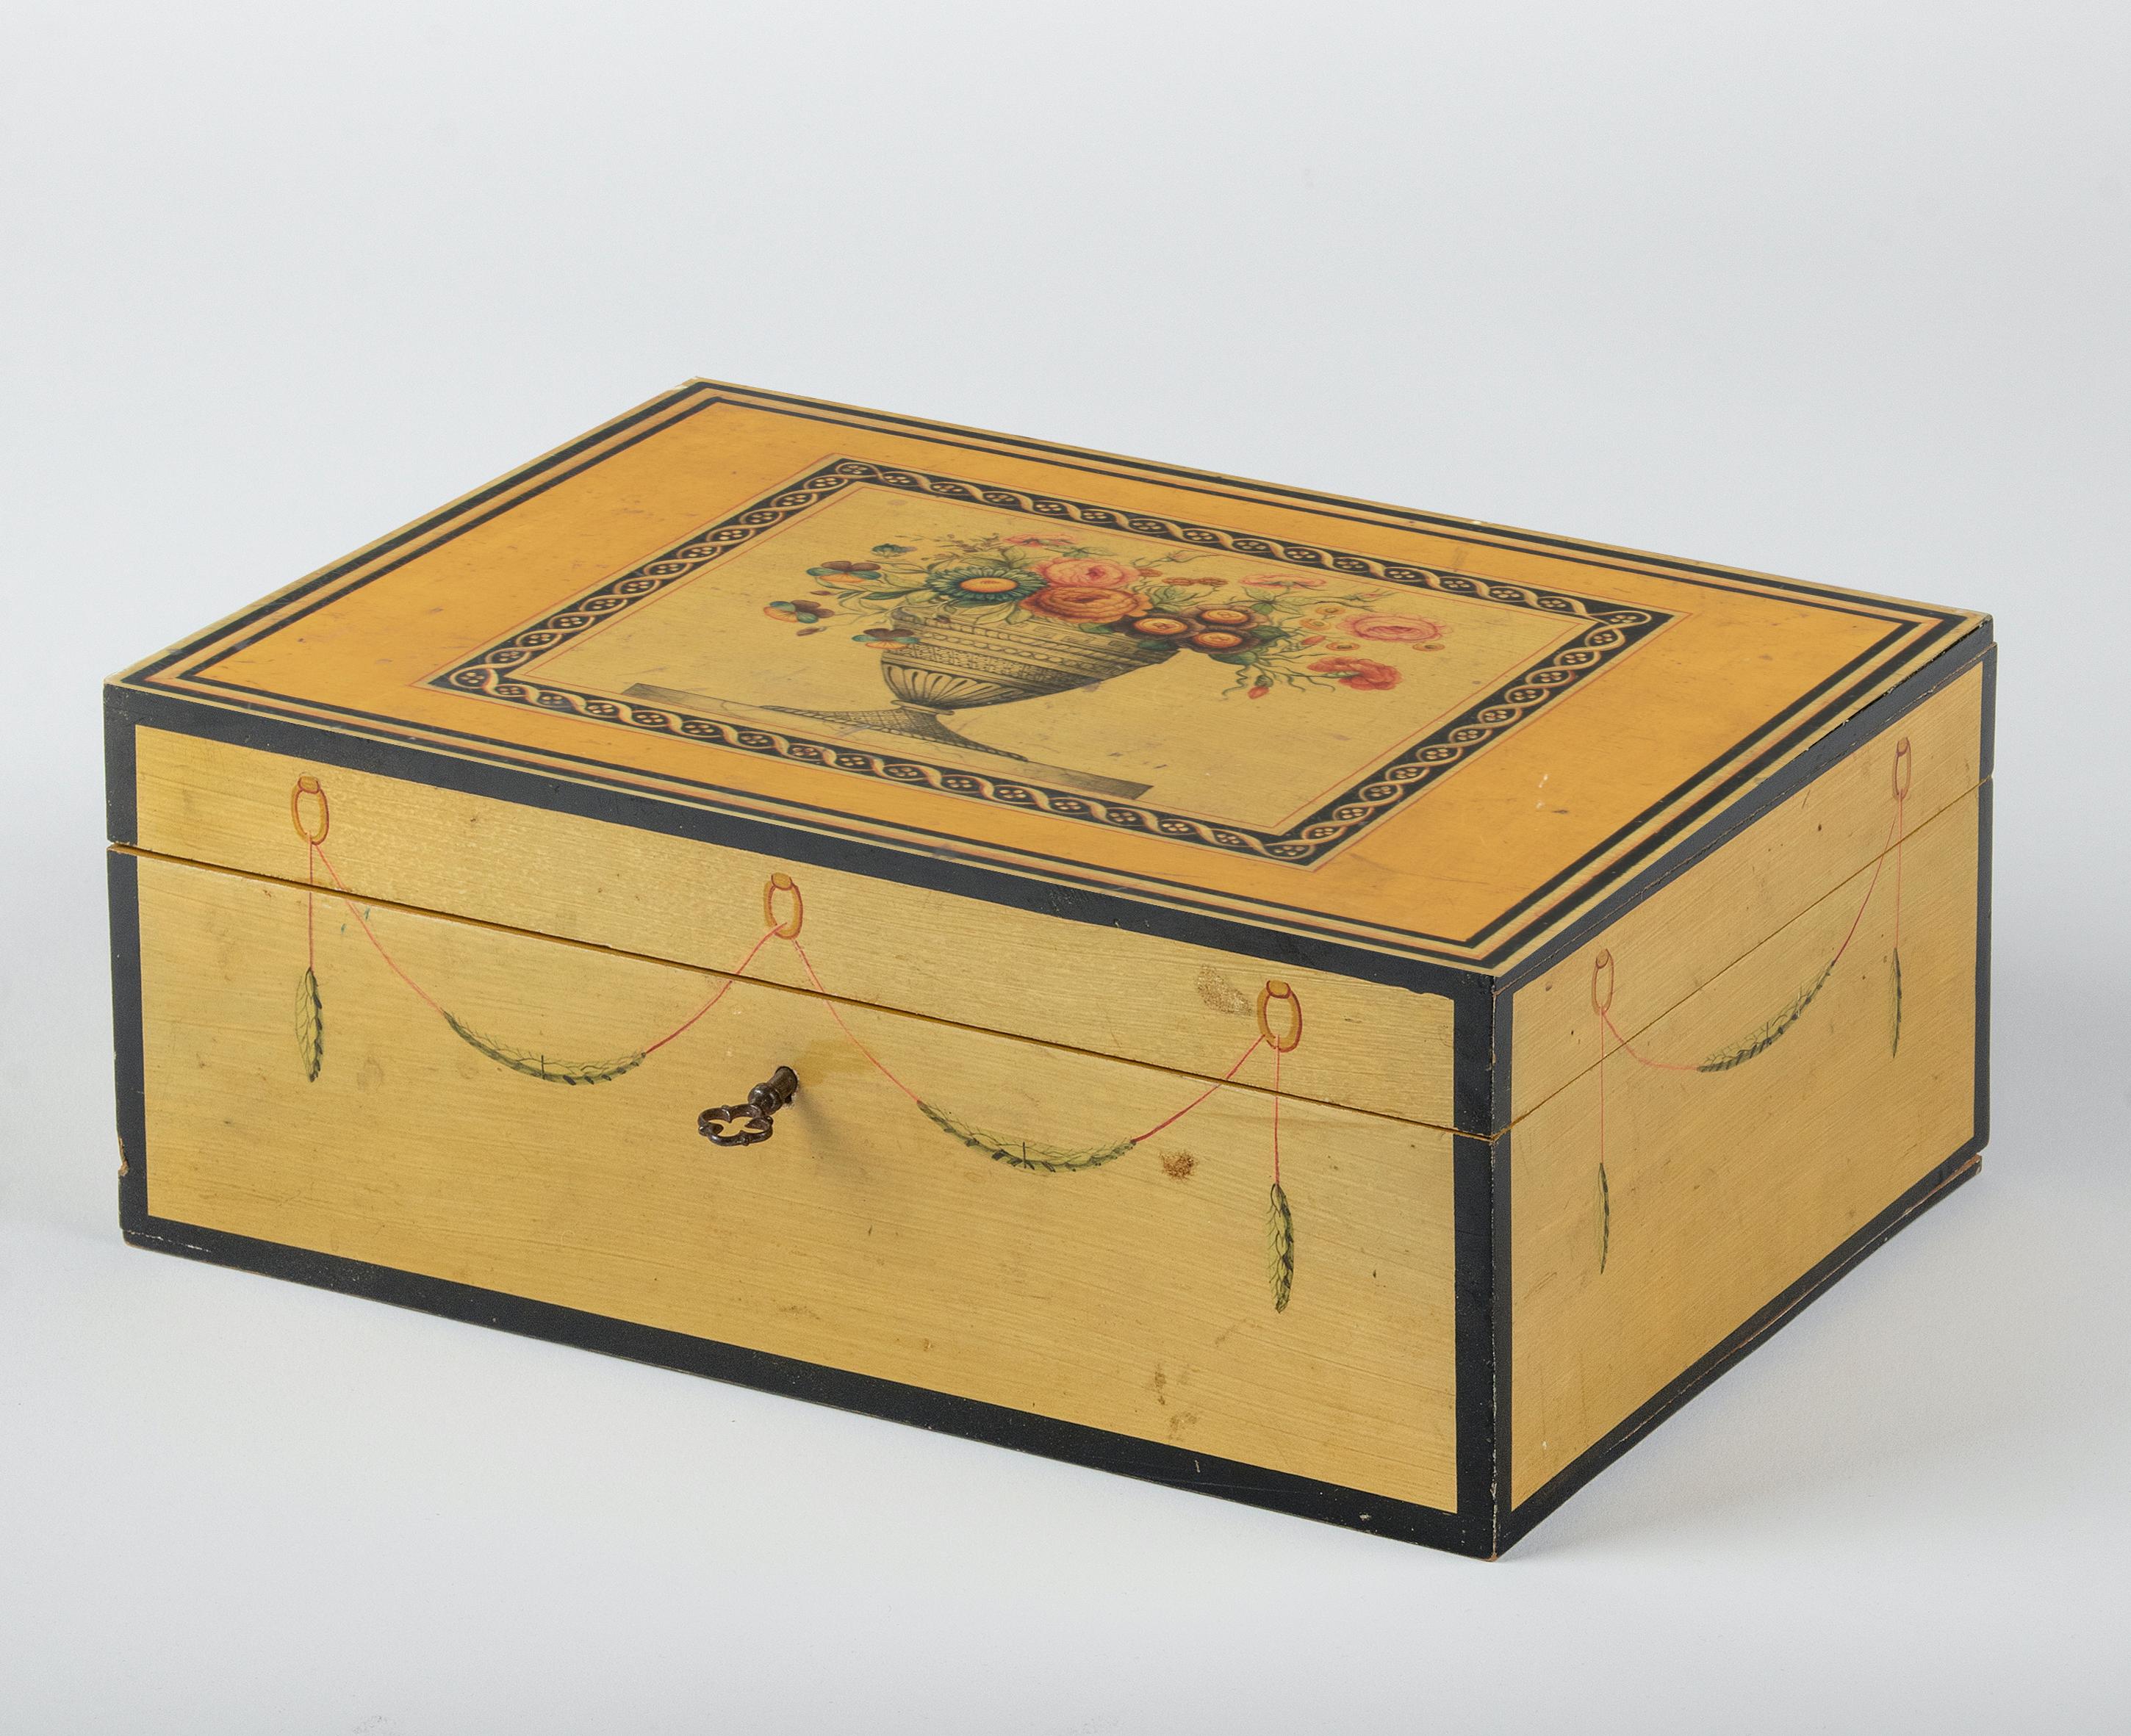 Beautiful antique wooden box. The box is hand-painted in Louis XVI style with flowers and garlands. The painting is really refined with great color and detail. The interior is lined with a pink silk fabric. The box has a working lock and original